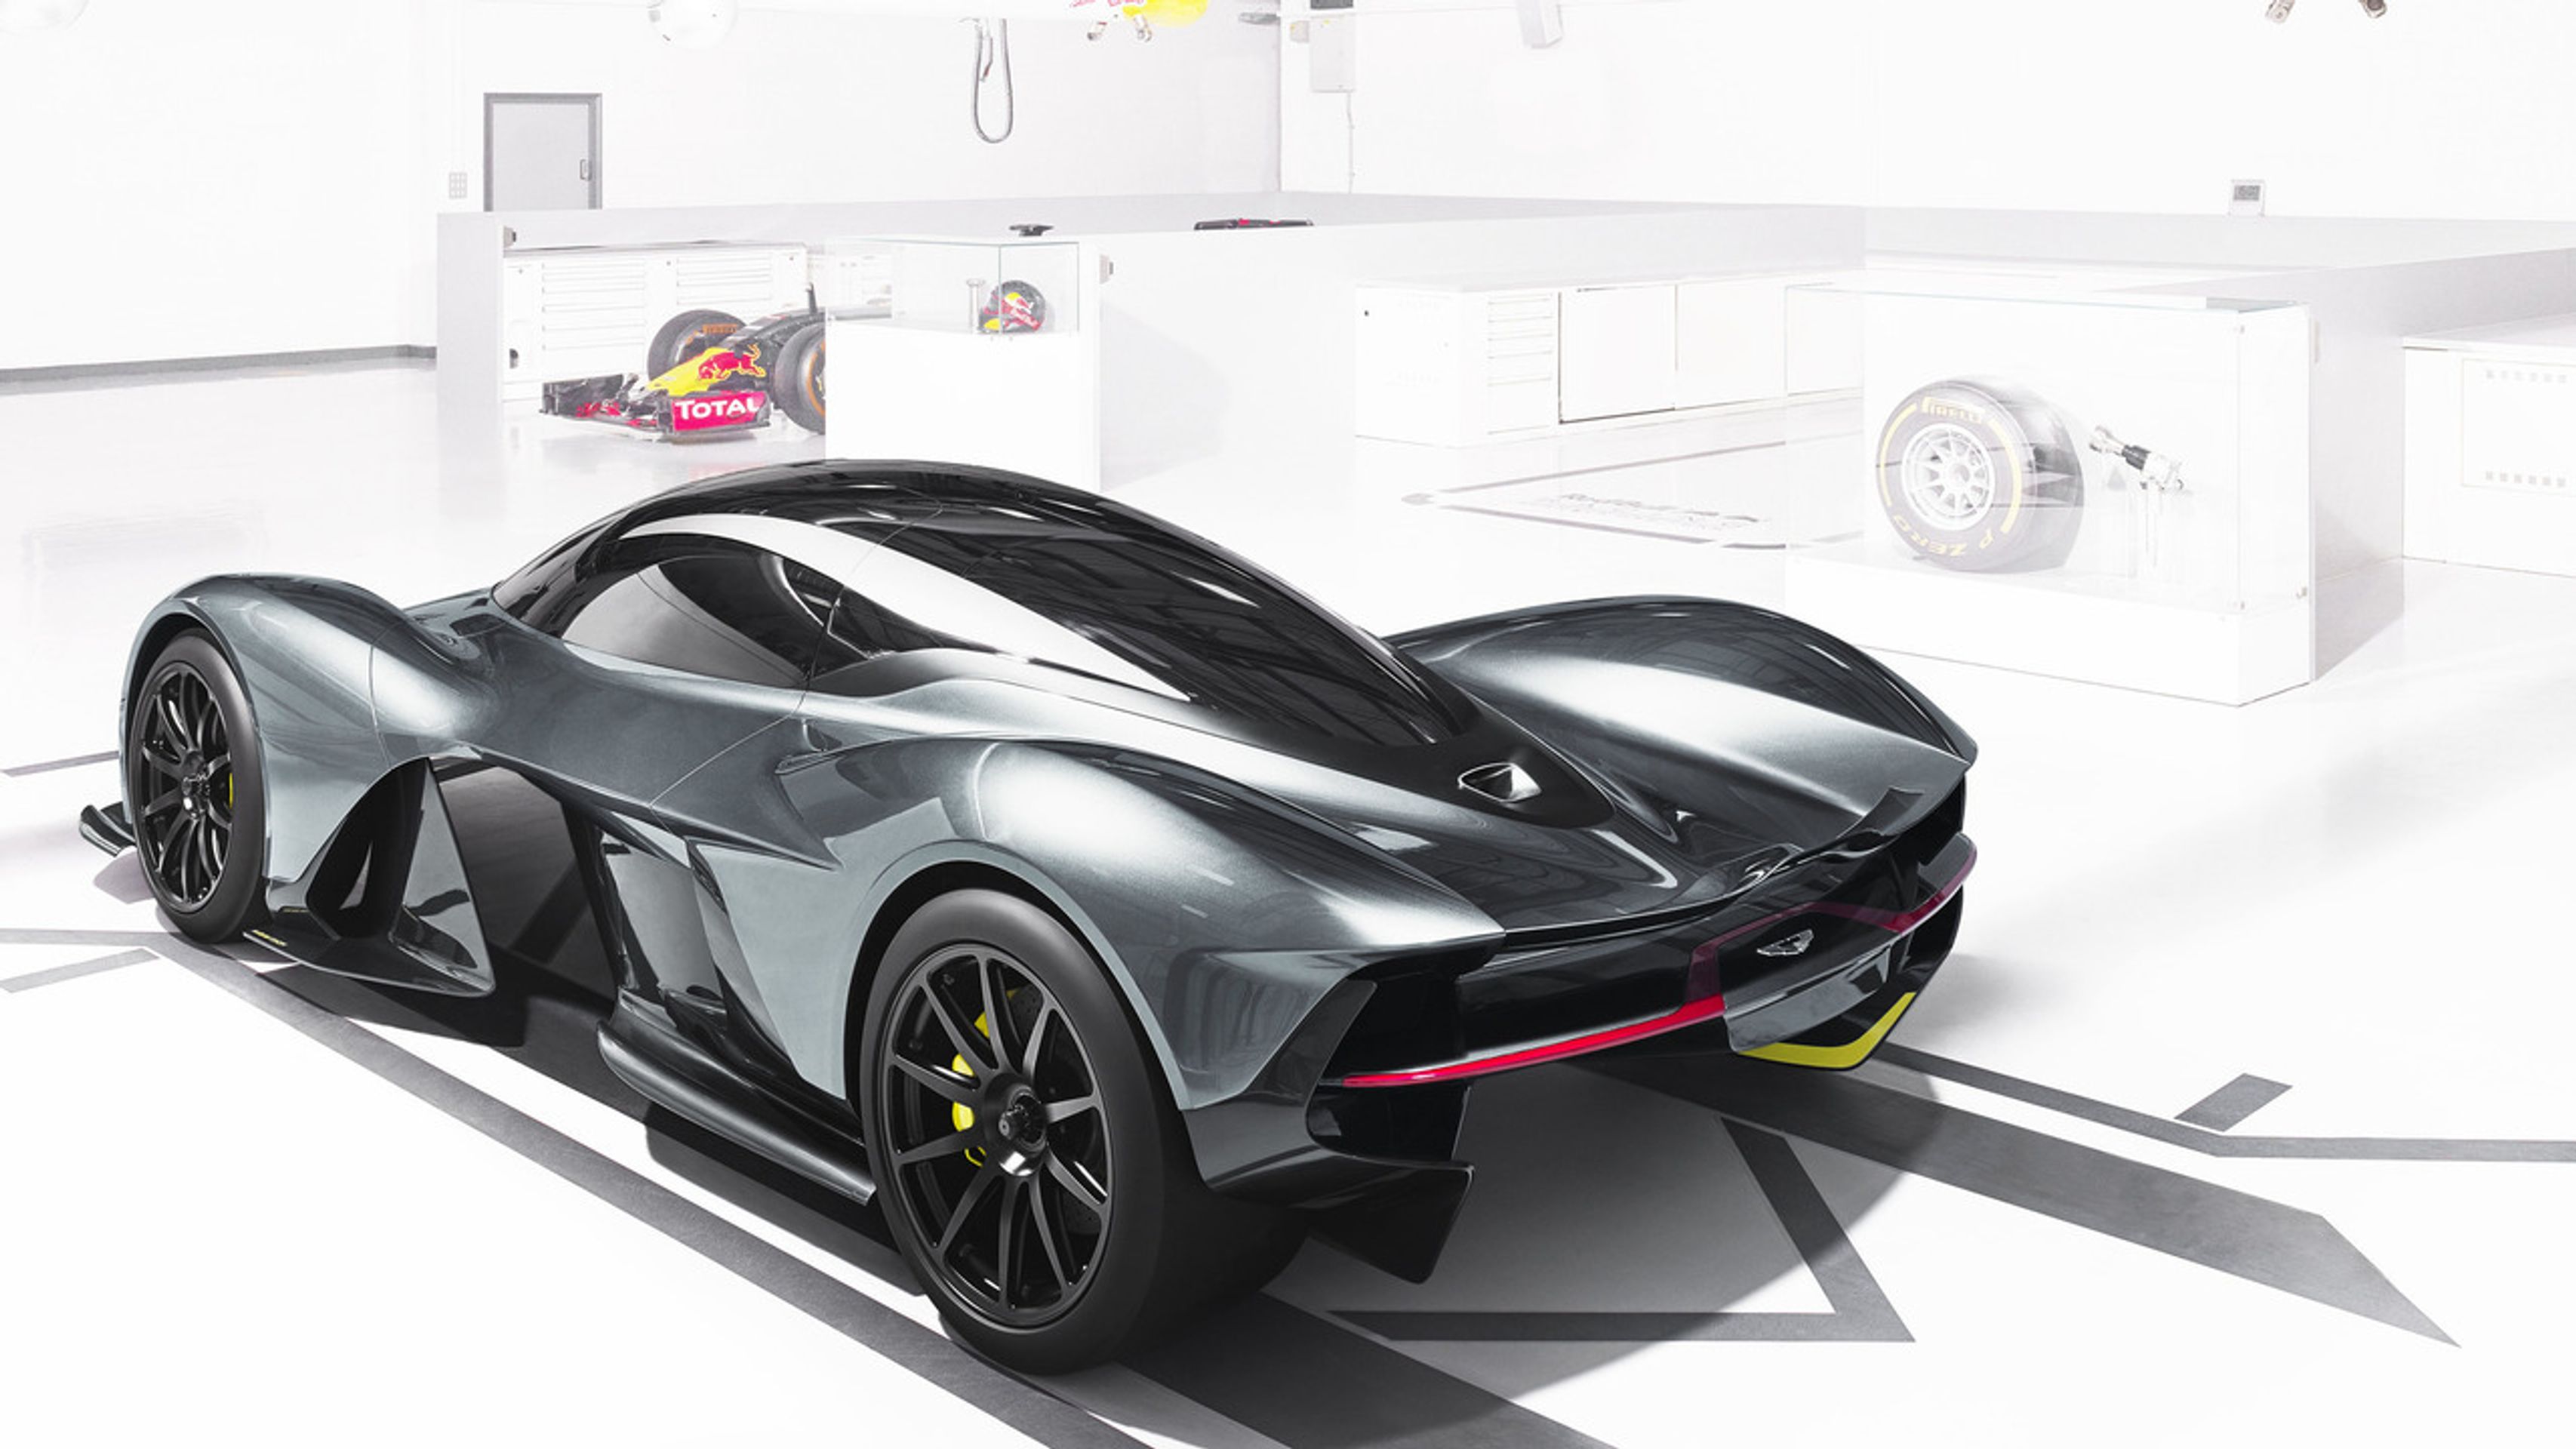 AM-RB 001 - 8 - GALERIE: AM-RB 001 (7/7)